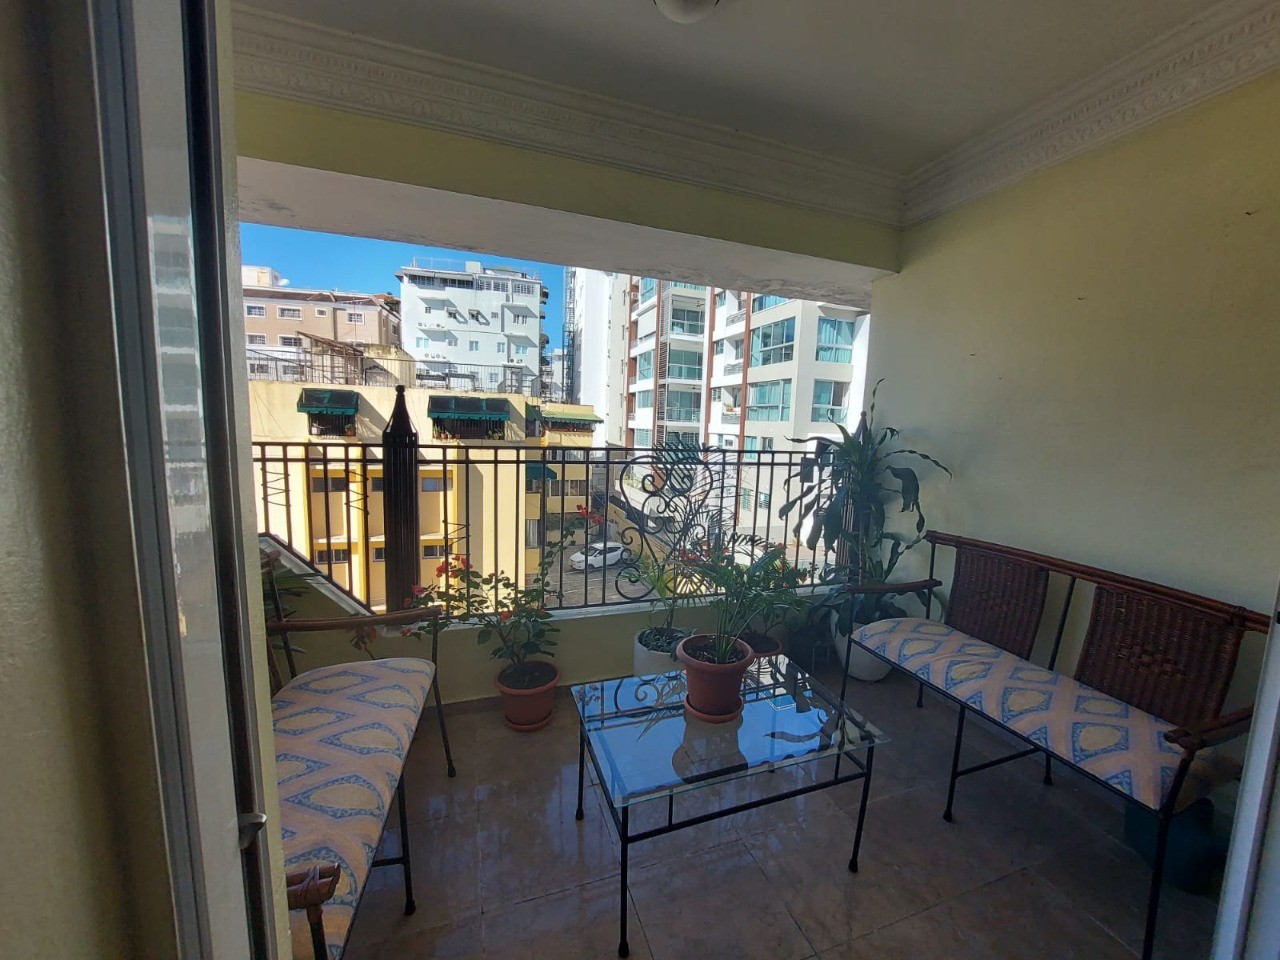  Penthouse 4to piso  Urb. Real Con Terraza Privada
 1